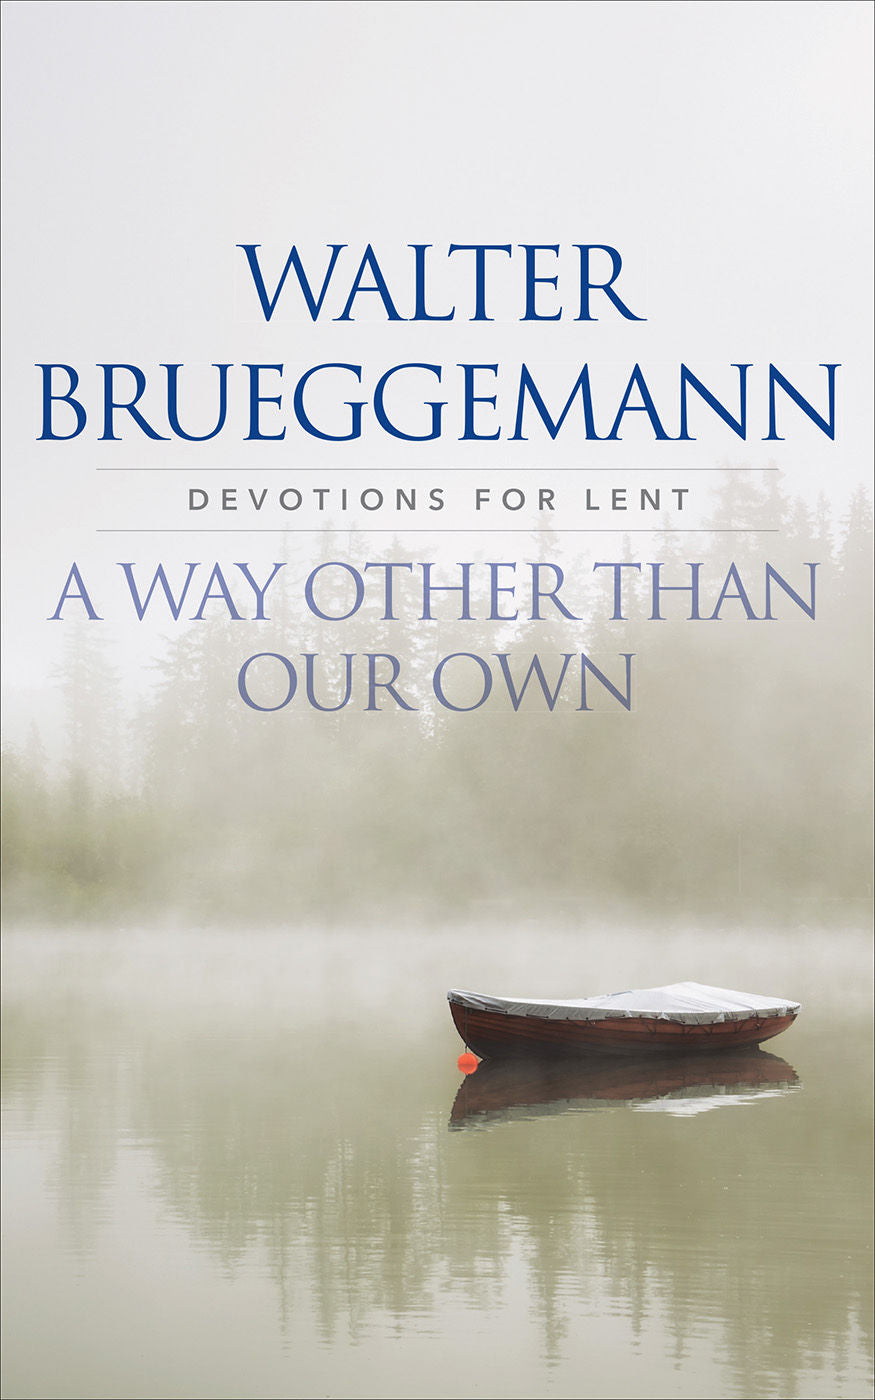 A Way Other Than Our Own by Walter Brueggeman